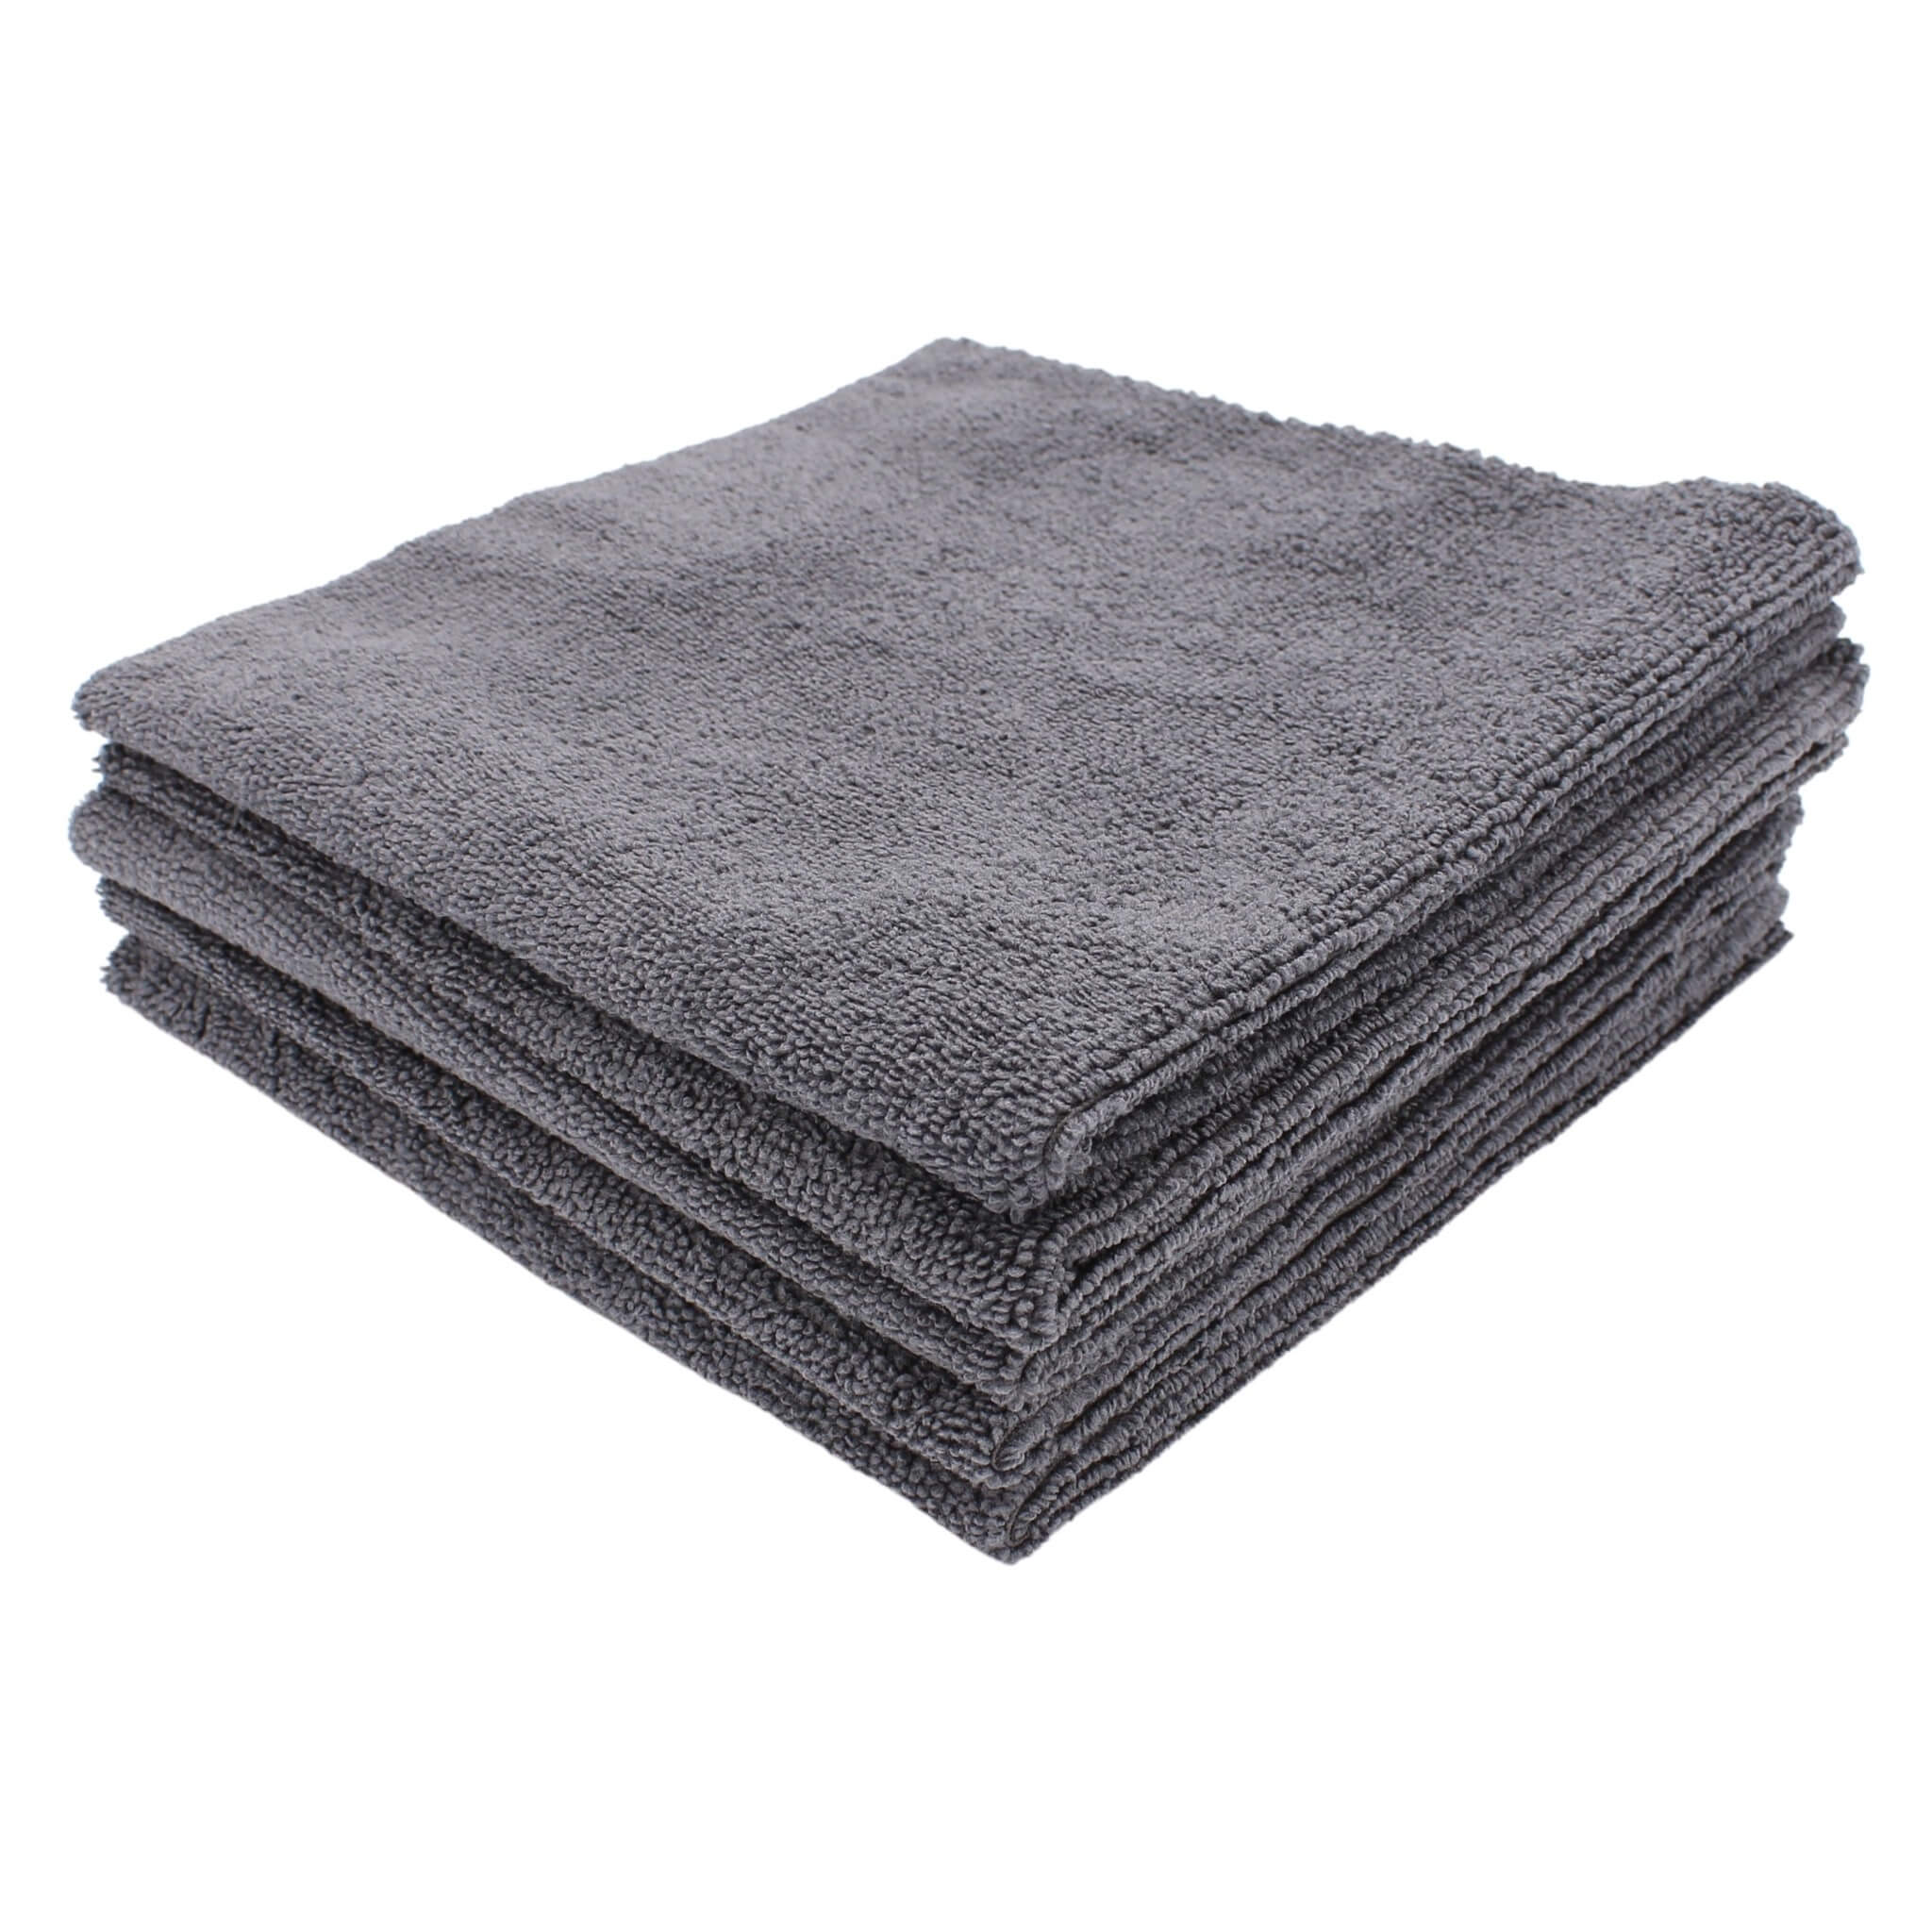 Throwing in the Towel: How to Wash Microfiber Towels